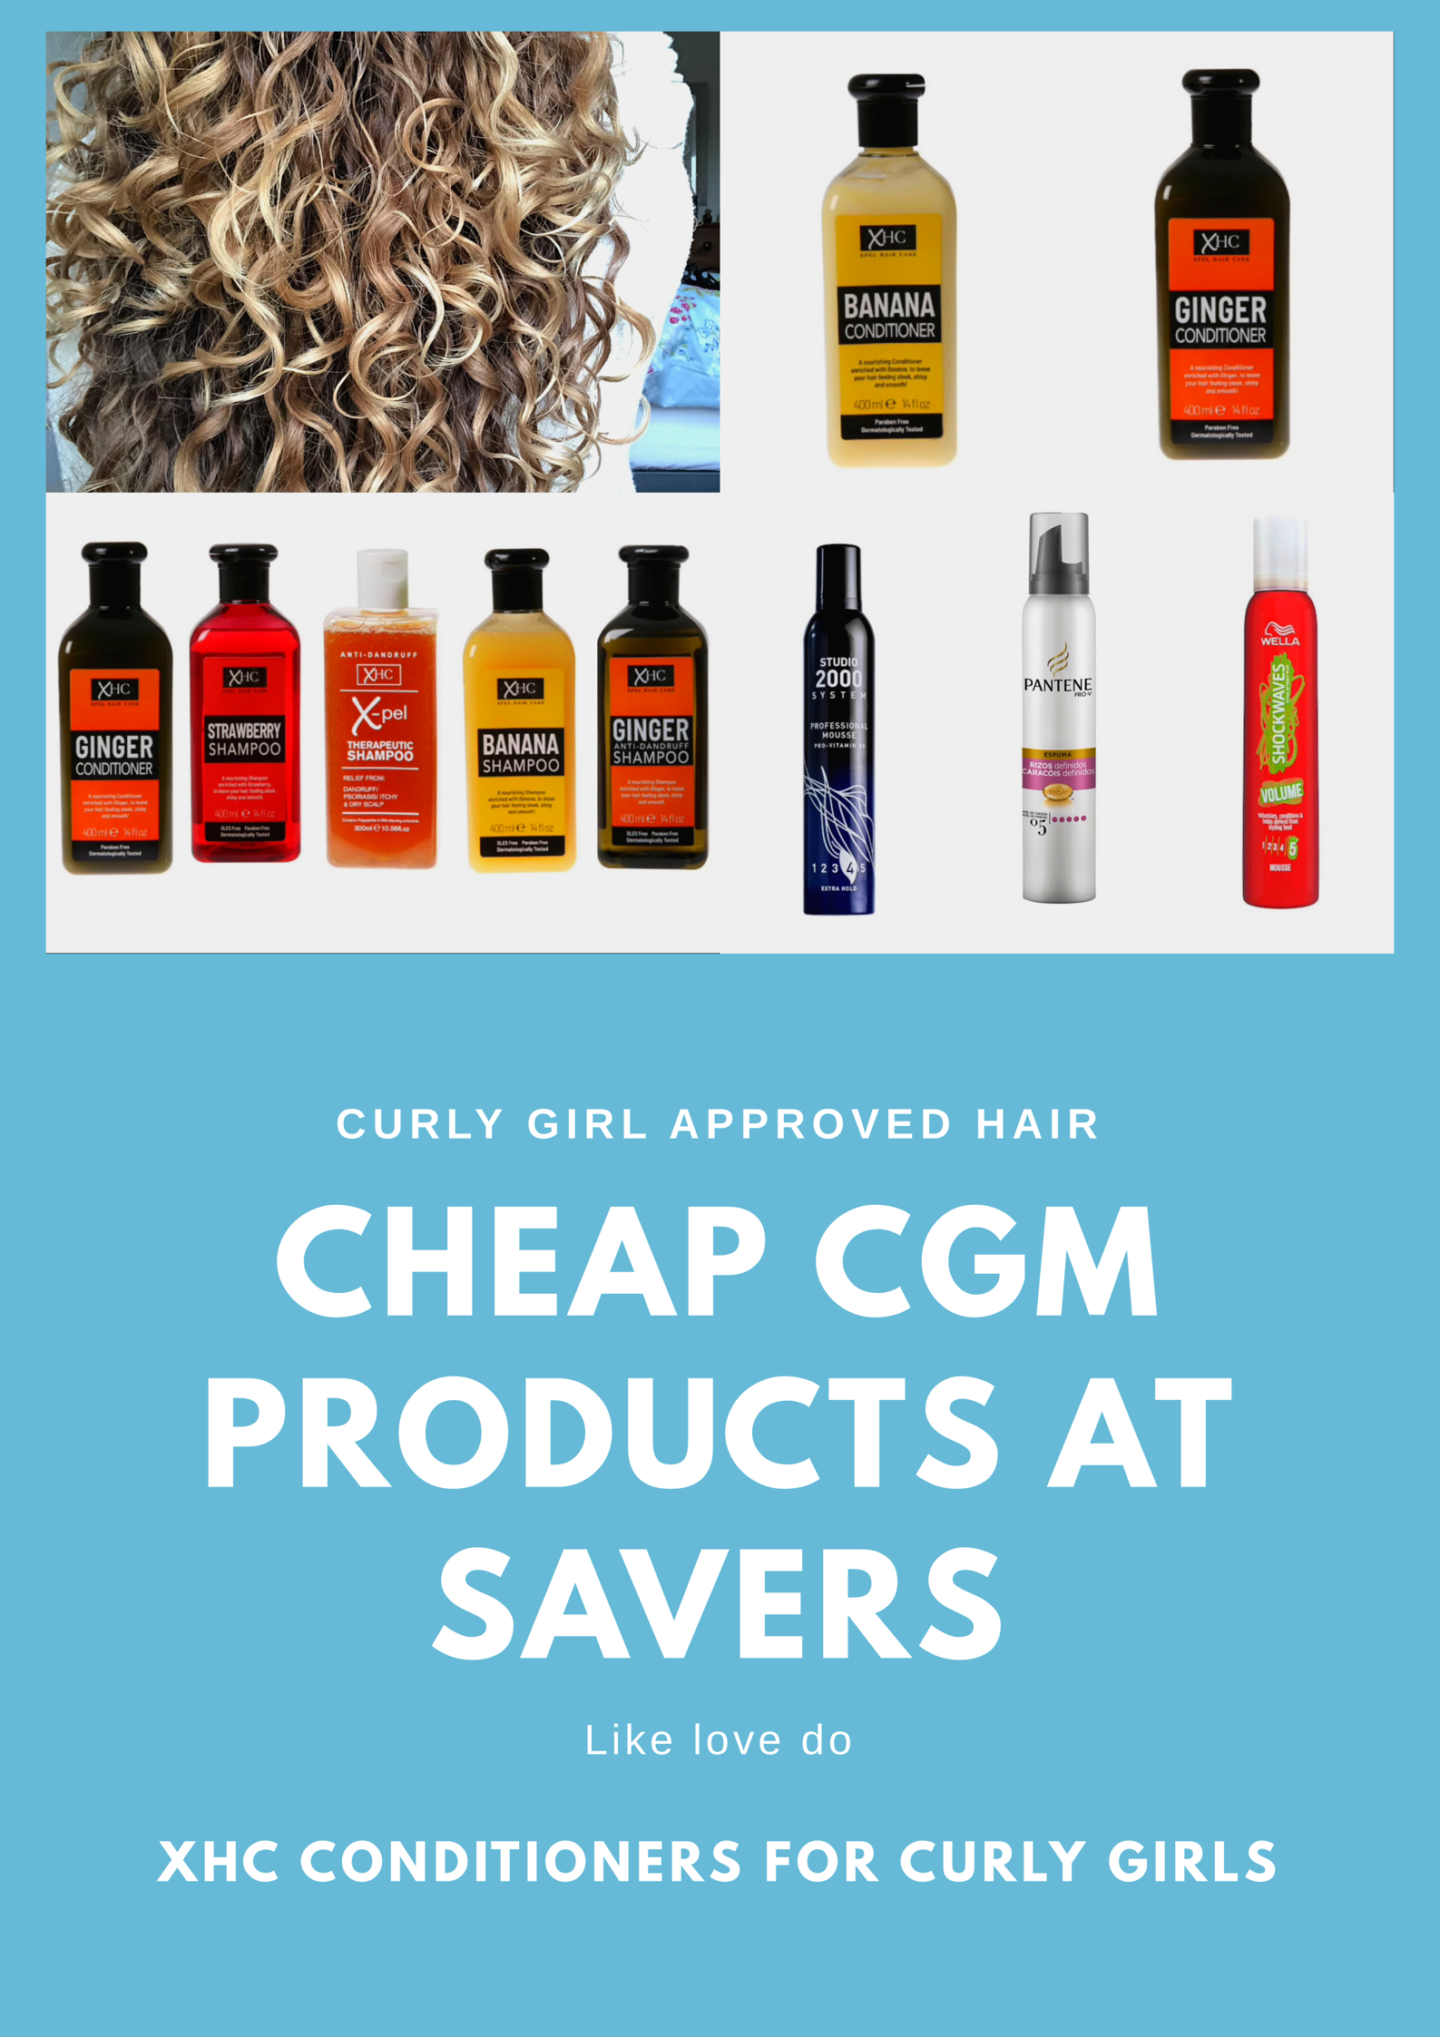 Savers stocks a range of beauty, hair and home products some of which are curly girl safe. Curly Girl Method Products in Savers can be seen in this post. Savers is a shop based in the UK with over 450 shops and an online that stocks cheap cgm products.